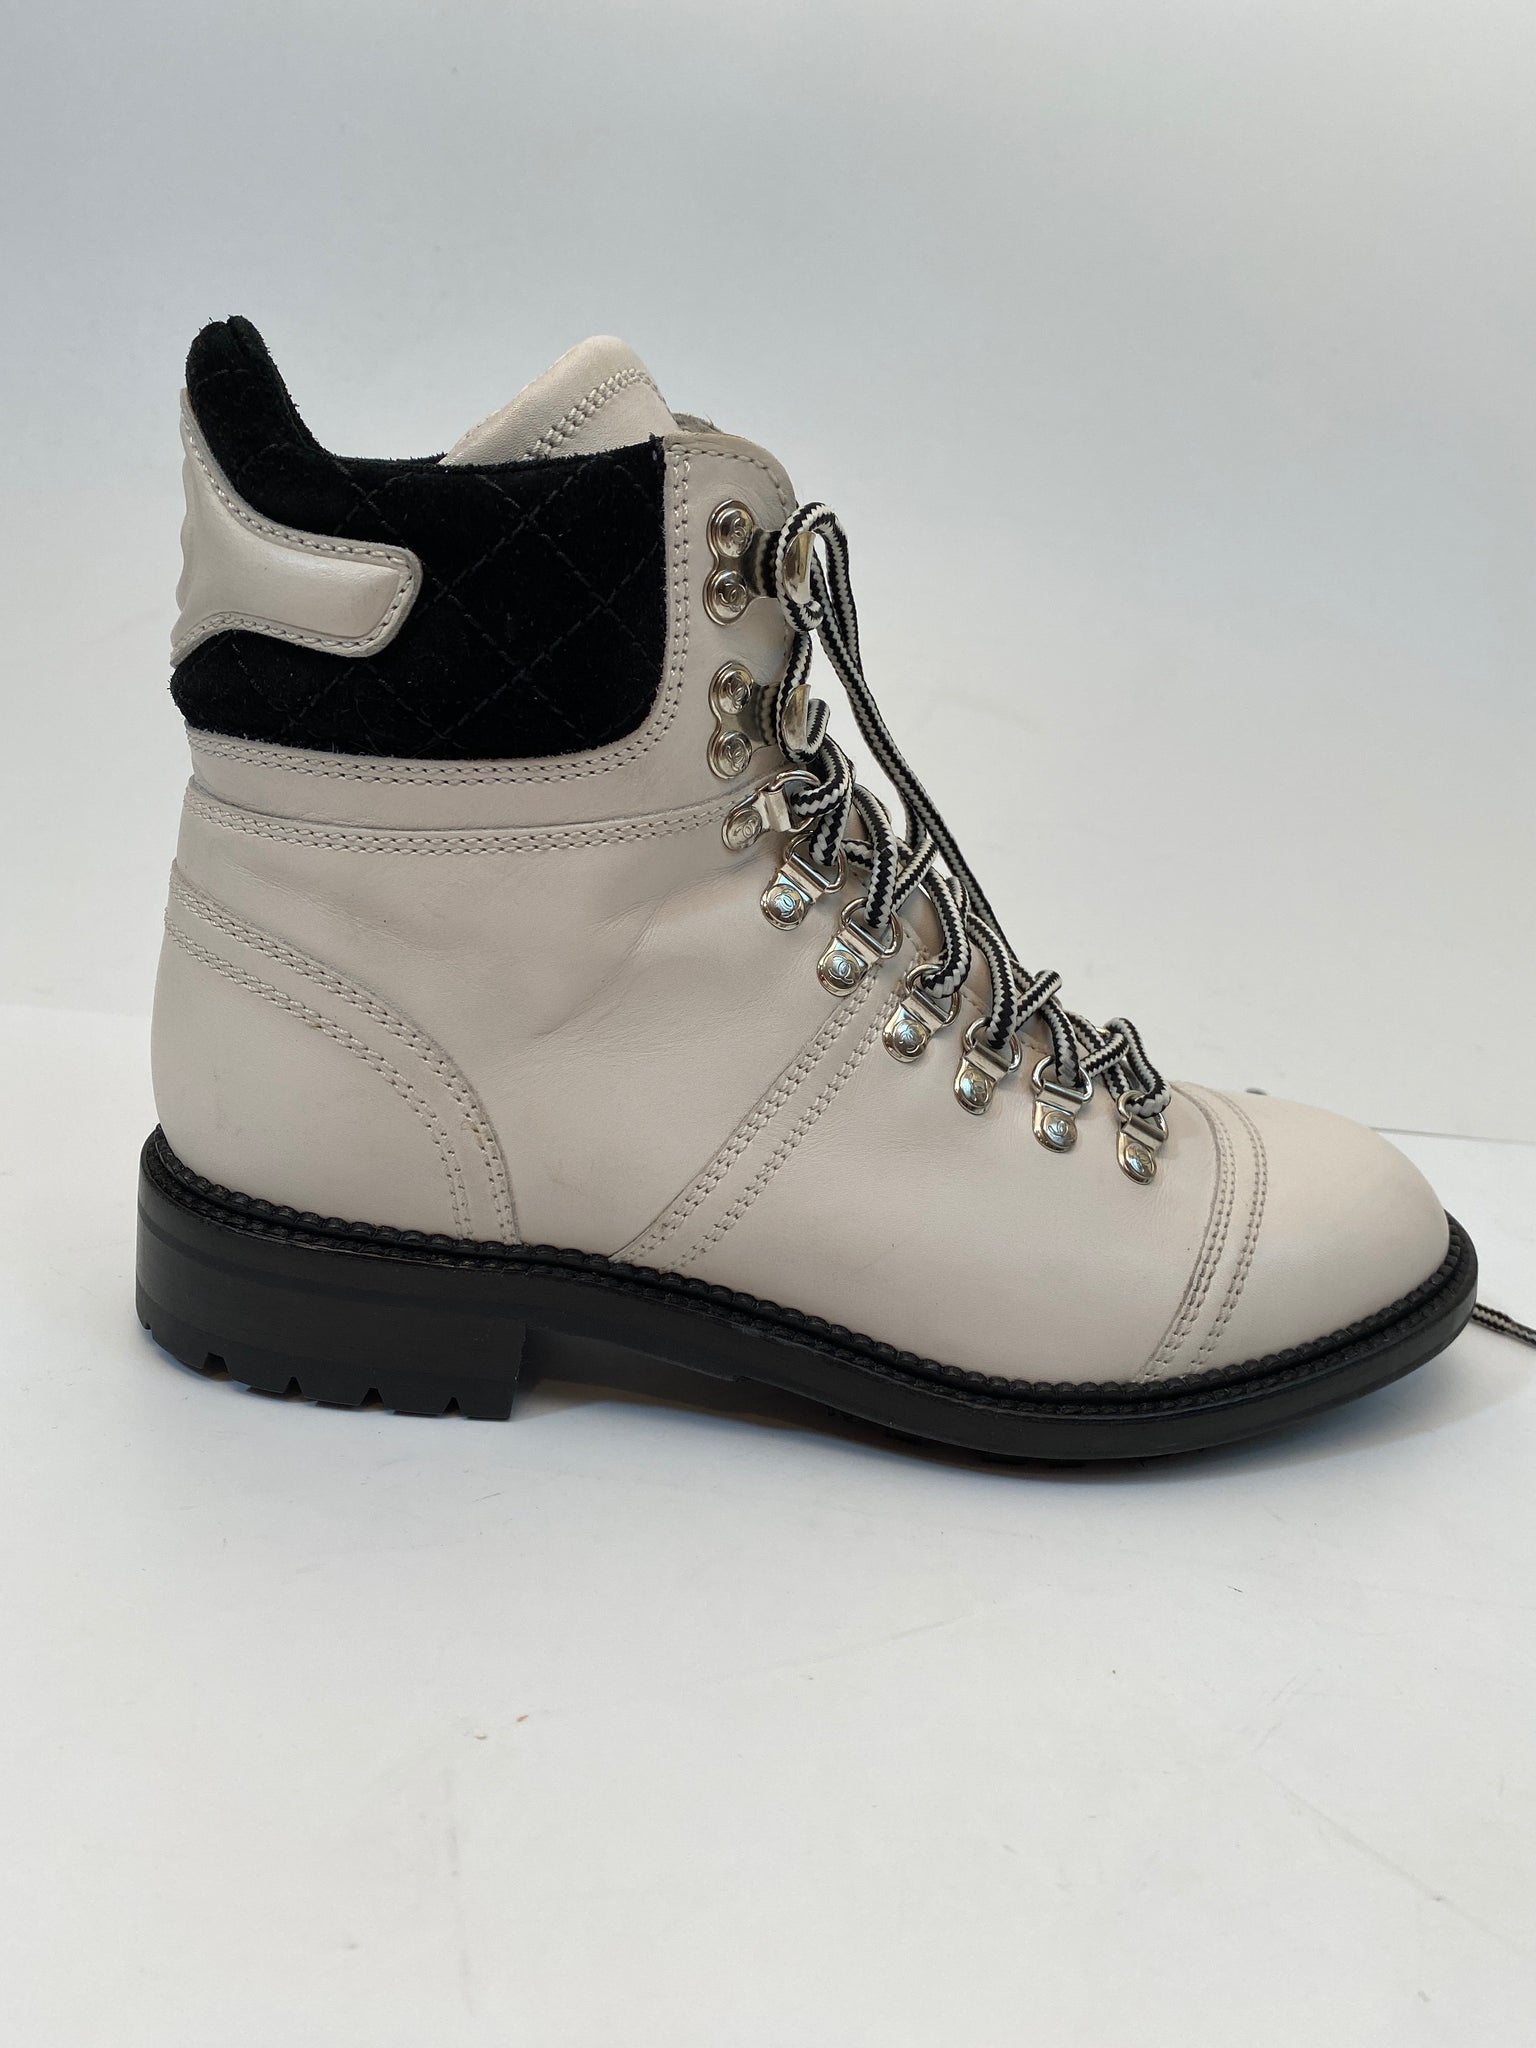 Chanel Beige & Black Leather Lace Up Tall Boots with CC Logo 37.5